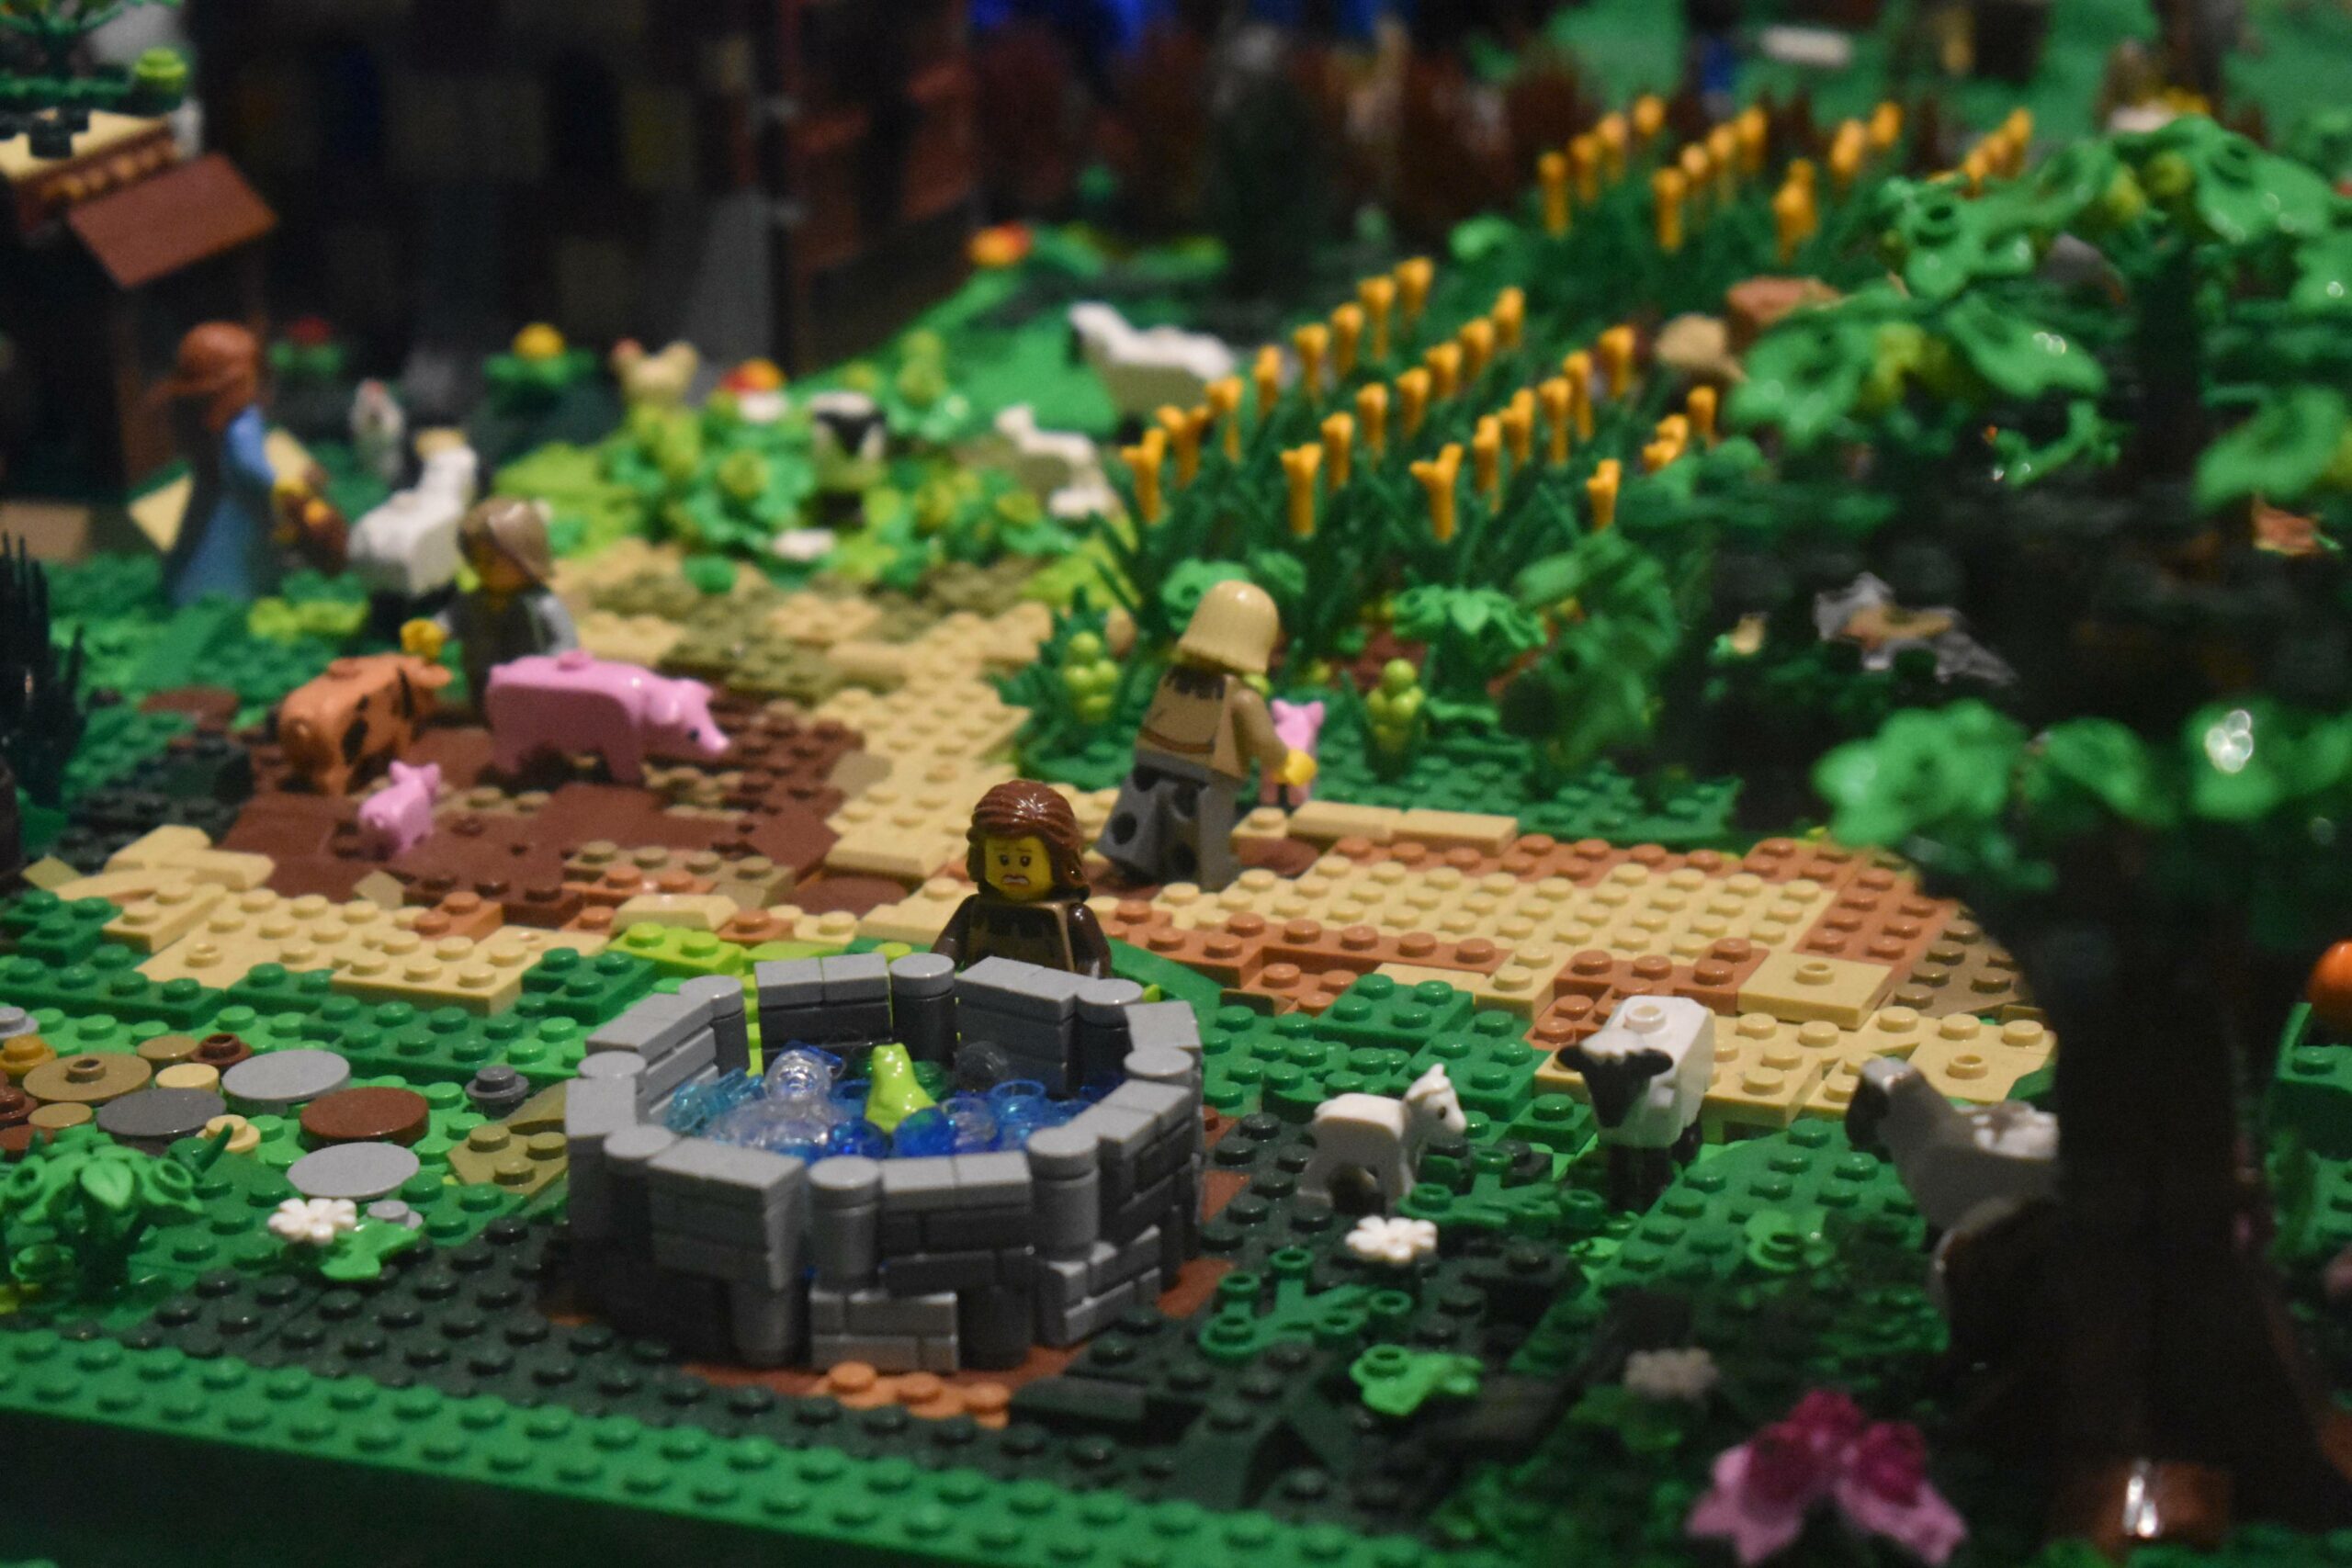 A photo of various lego people on a lego set that resembles a green field with lego animals like a sheep and pigs.